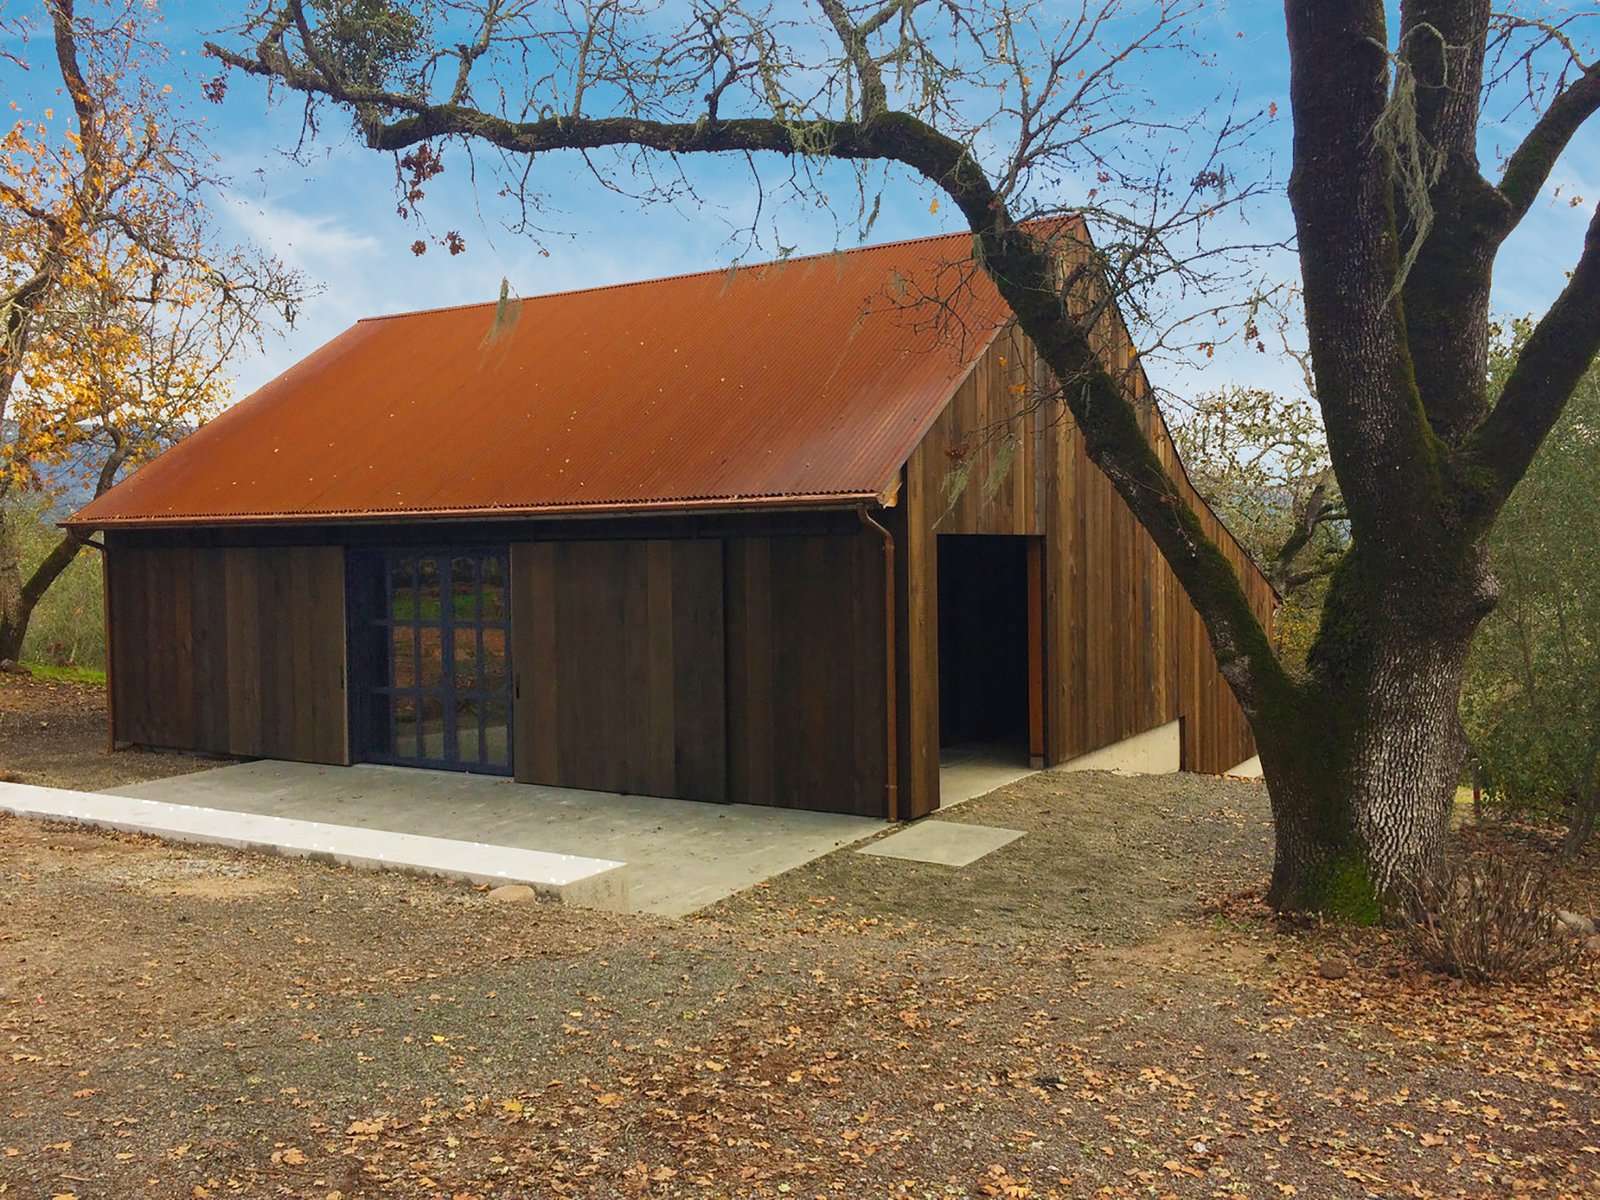 The barn’s original framing was kept for its agricultural character. Faulkner Architects applied an exterior envelope of salvaged redwood and added a Cor-Ten steel roof that will patina over time.